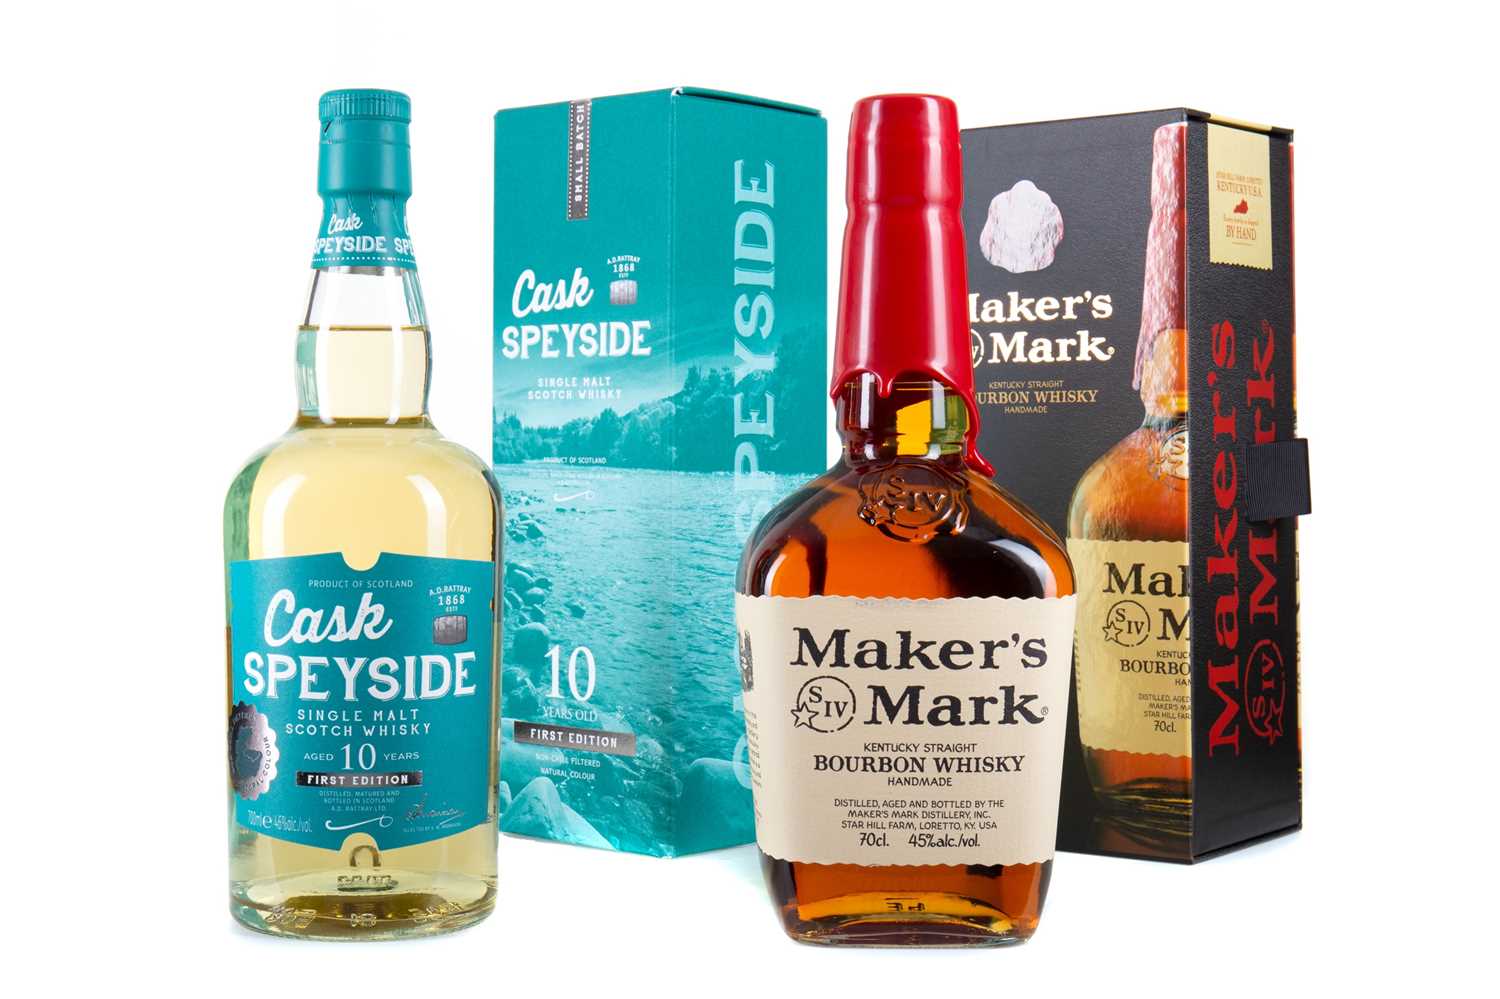 Lot 95 - CASK SPEYSIDE 10 YEAR OLD FIRST EDITION AND MAKER'S MARK